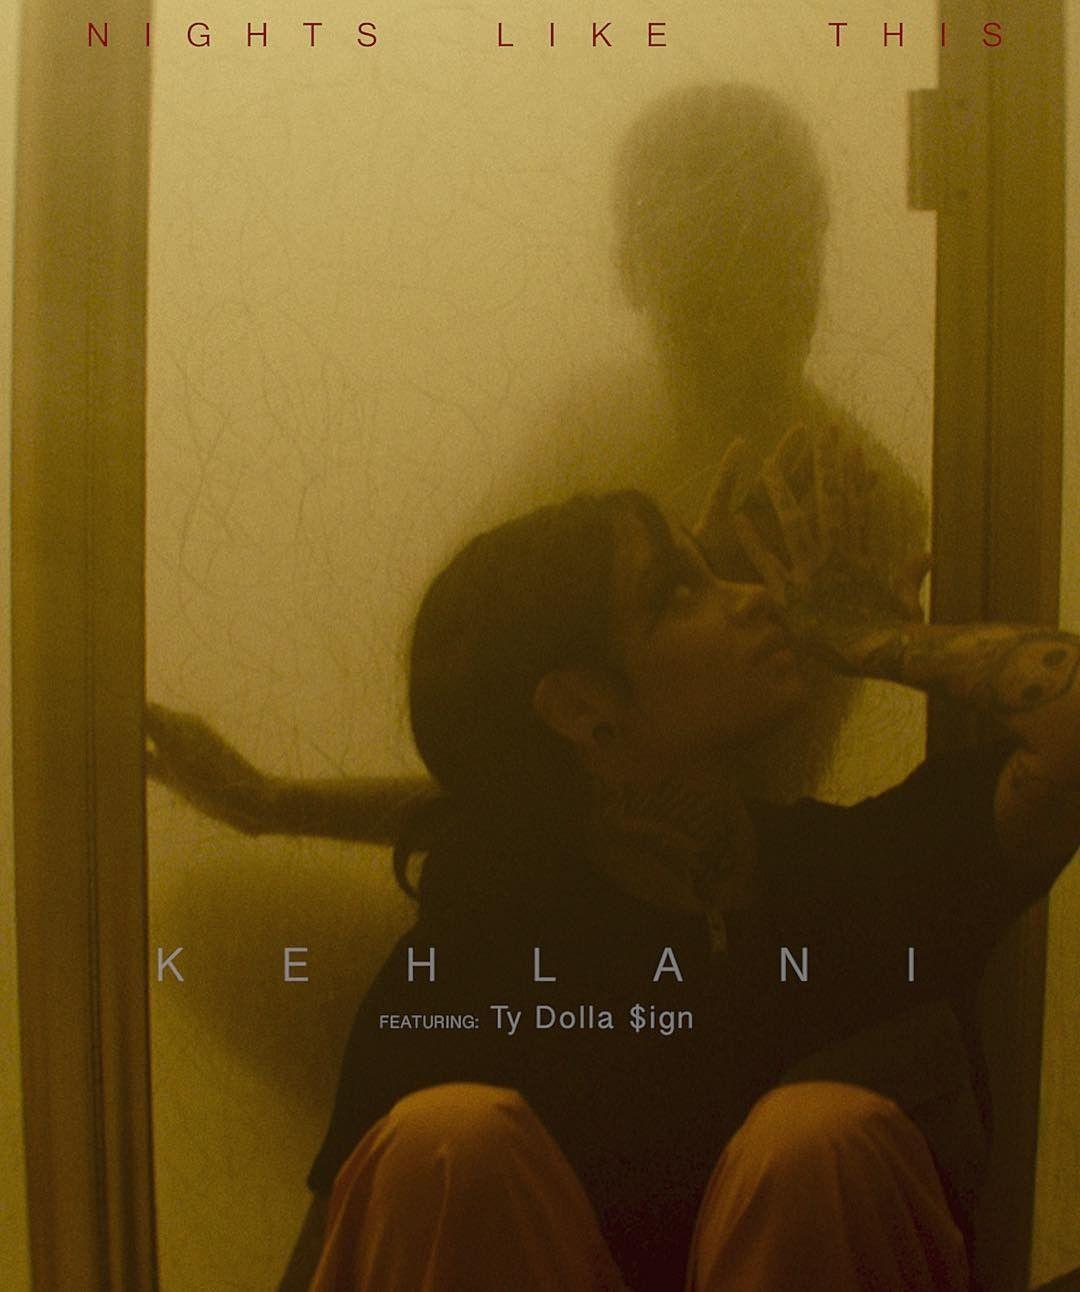 Nights Like This ft. Ty Dolla $ign (music video). Kehlani